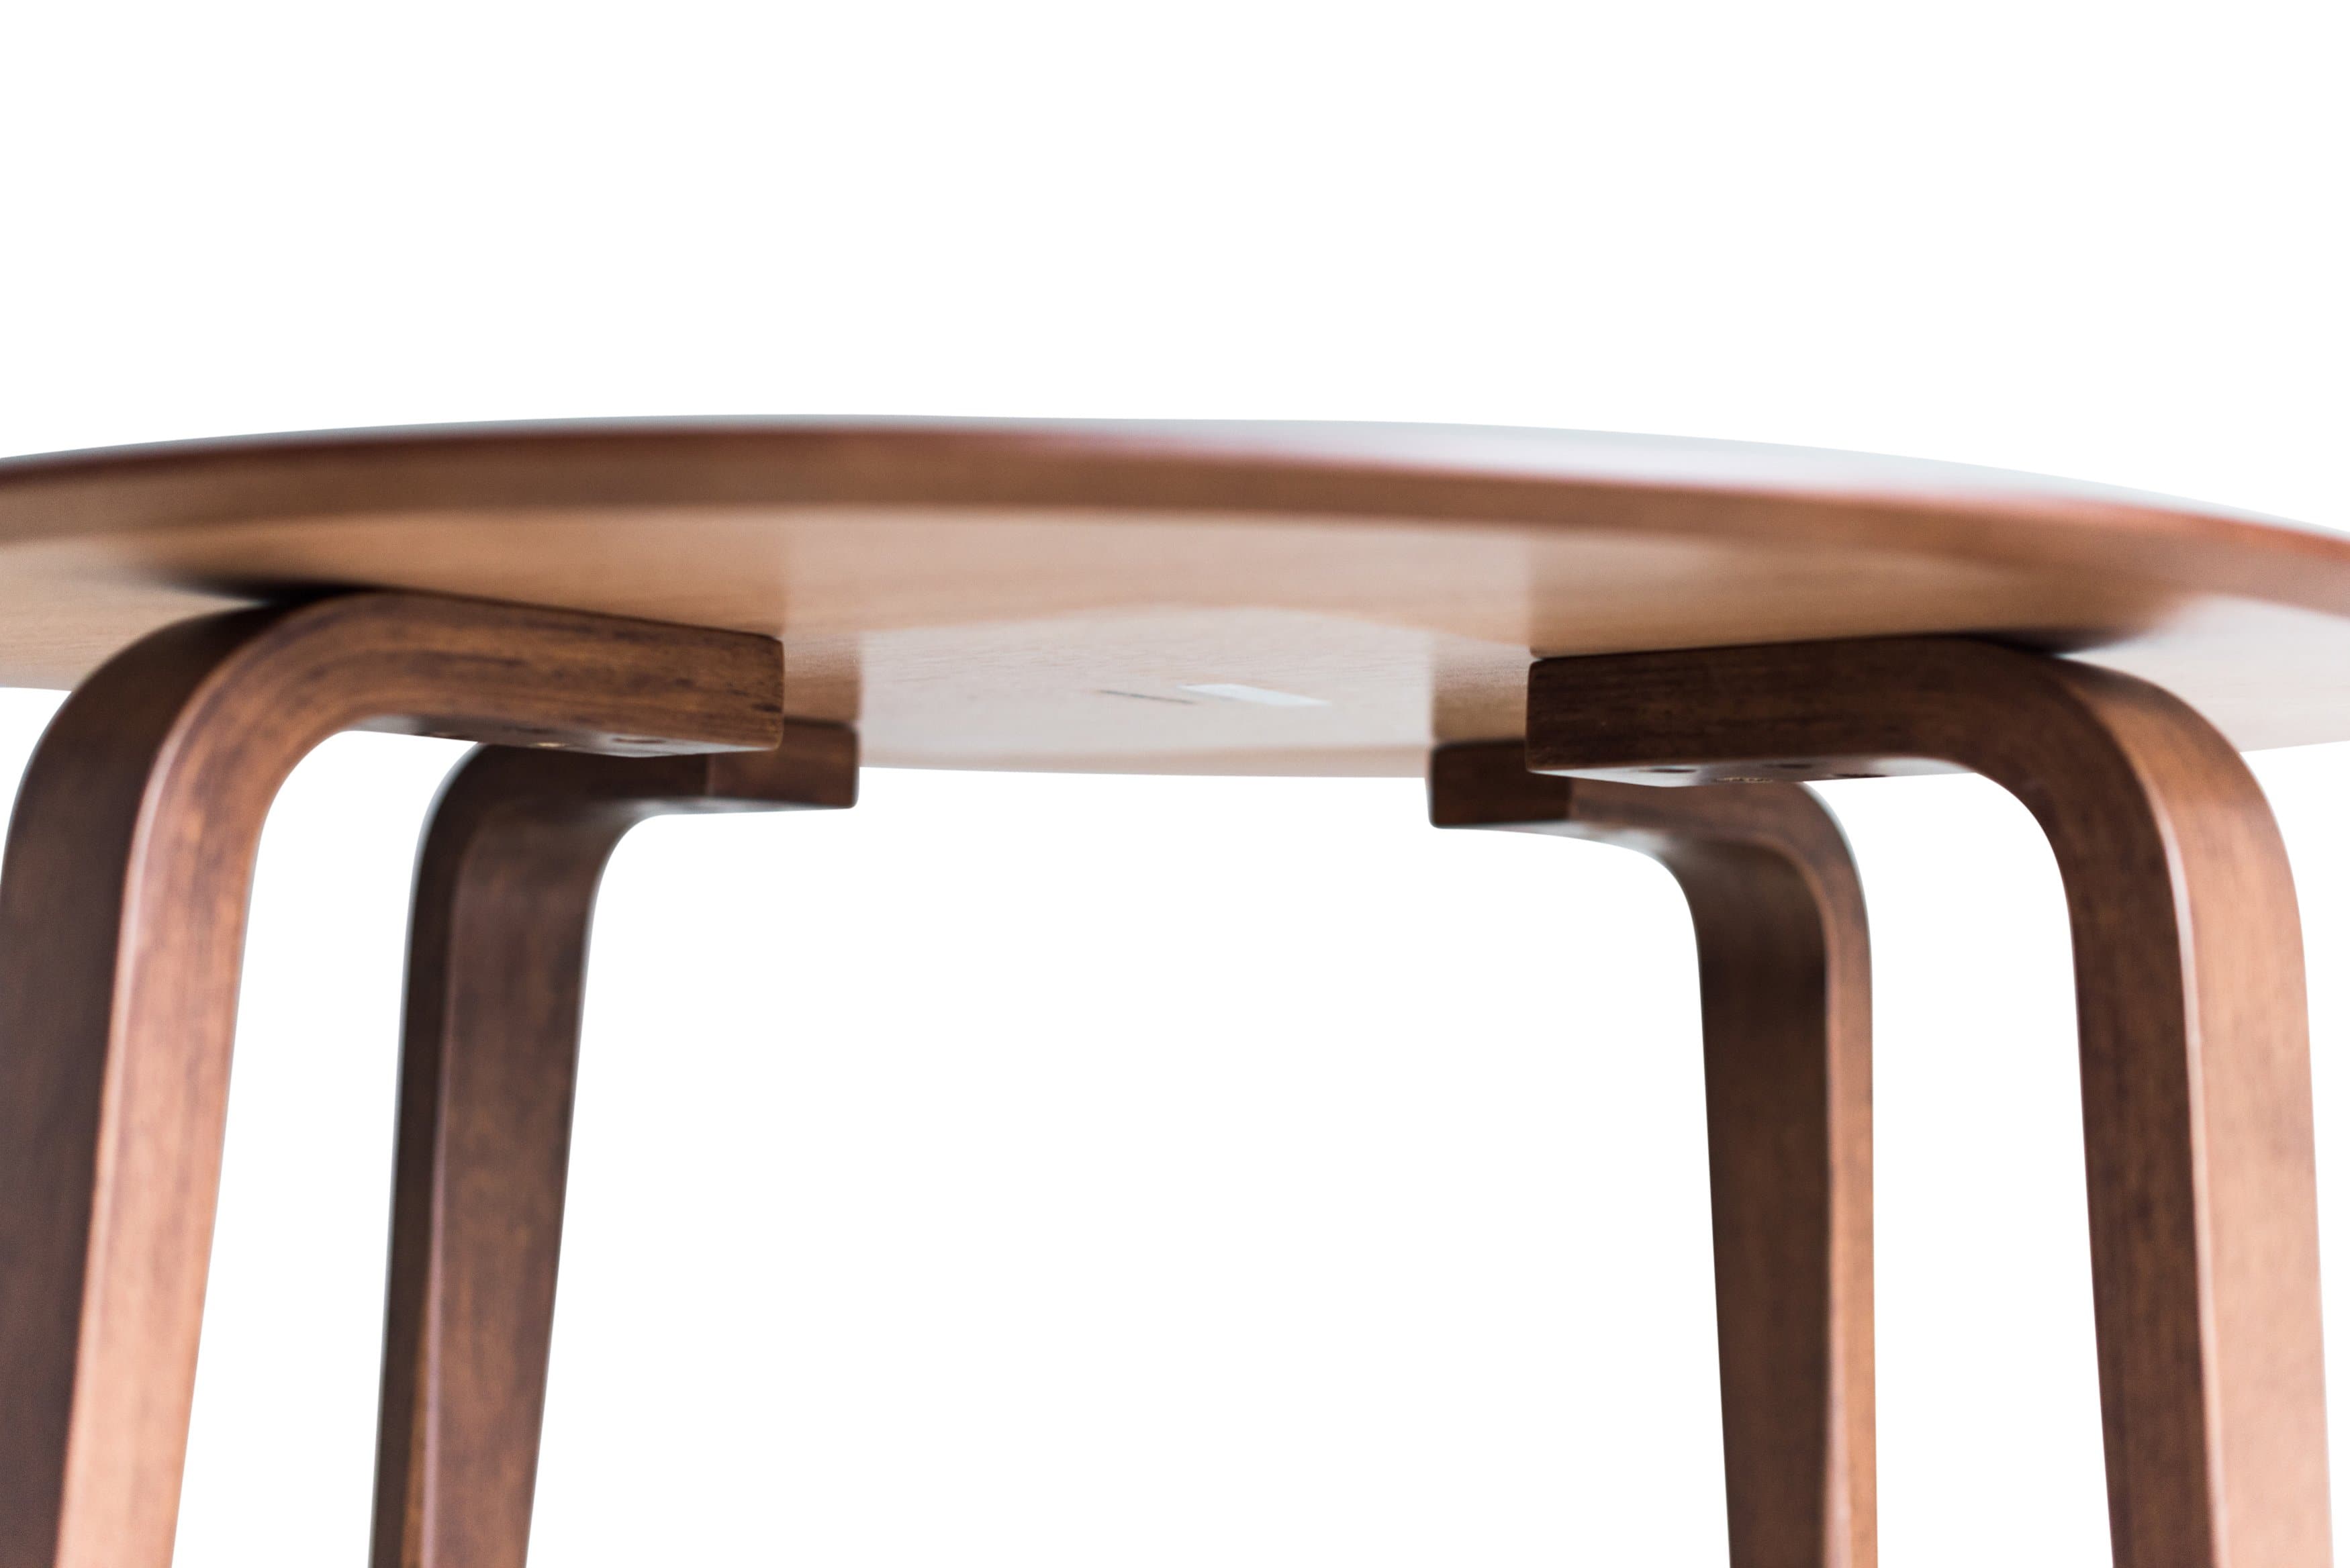 Bali Resort Style Round Solid Hardwood Timber Dining Table, 120cm Dia x  76cmH (RRP $799)